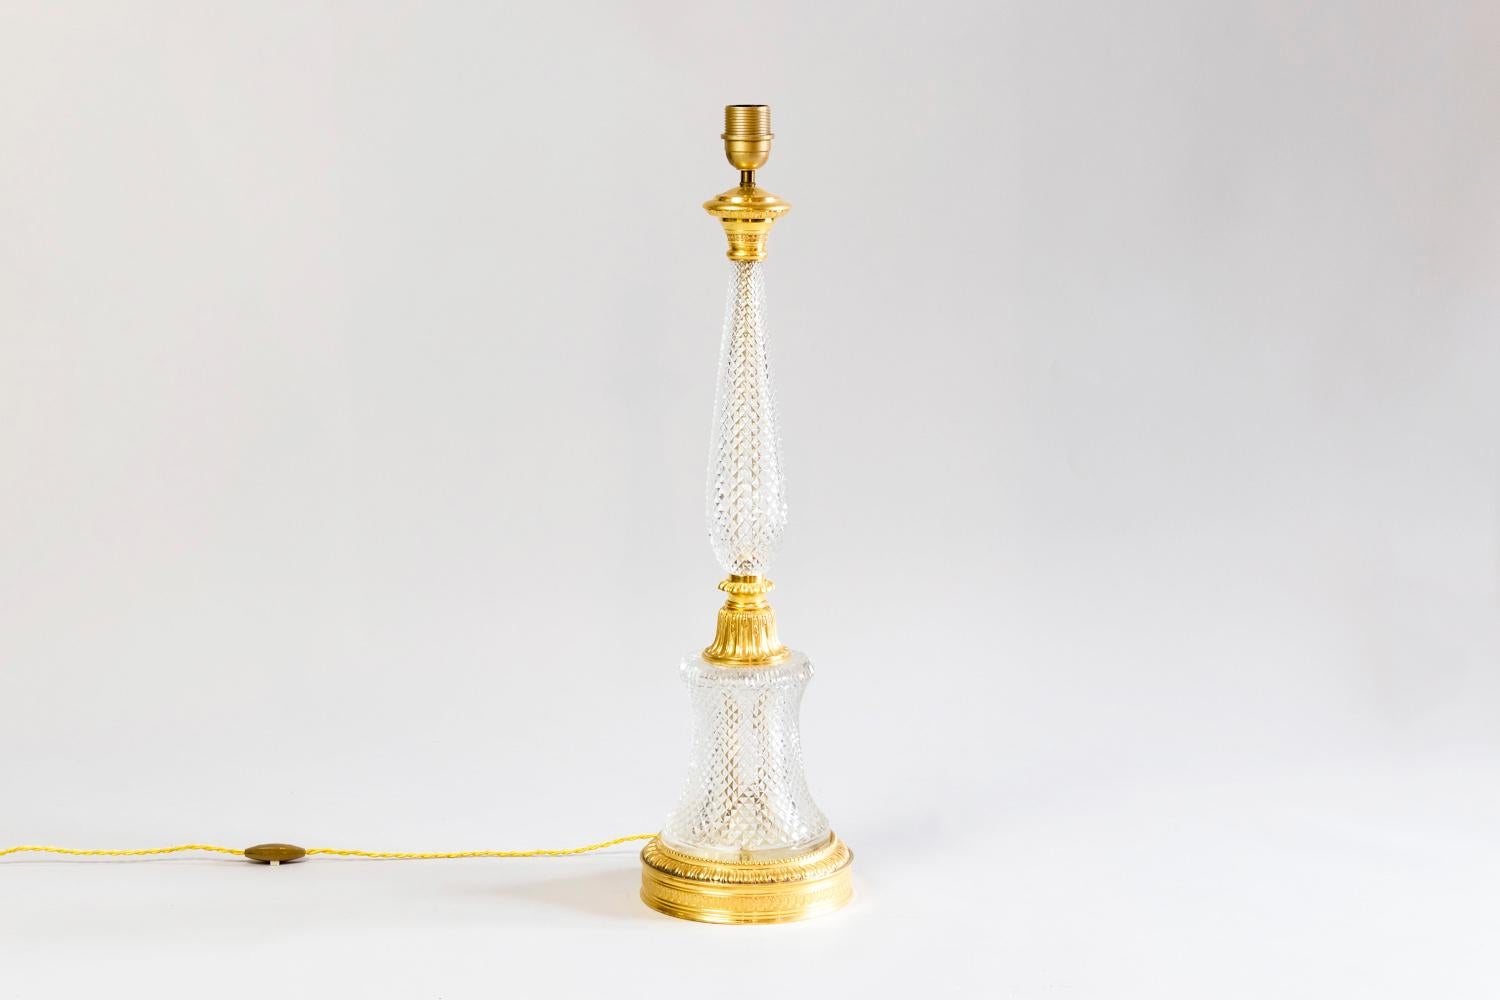 Large Empire style lamp in cut crystal and chiselled and gilt bronze mount. Circular gilt bronze base adorned with a Walter leaves frieze, gadroons and beads topped by a cut crystal piedouche part. Bottom part linked to the crystal baluster shape